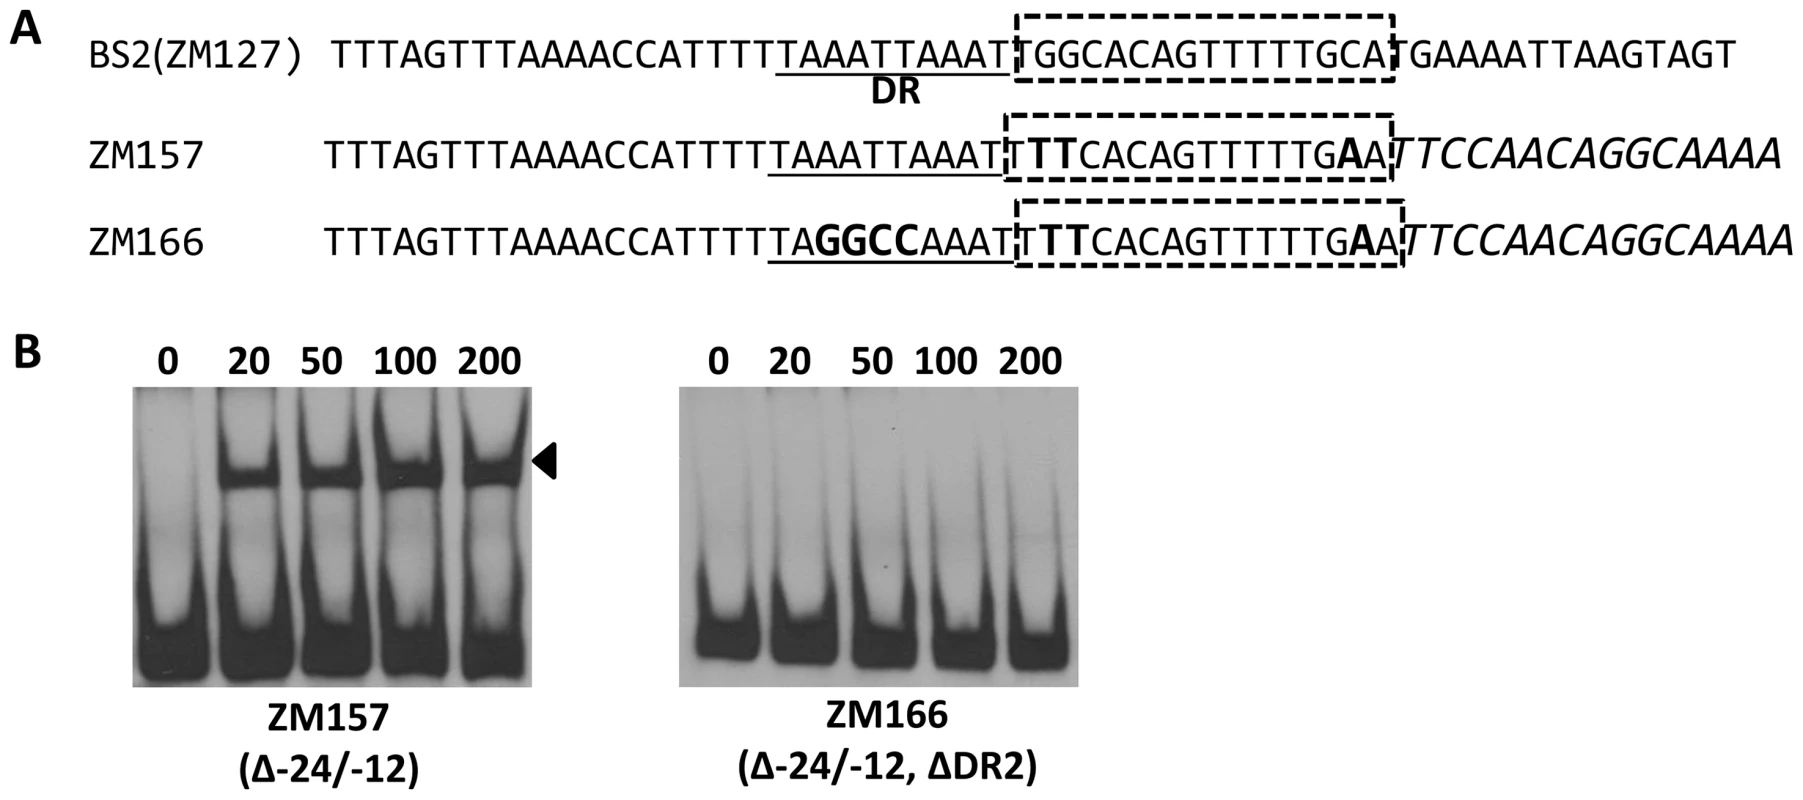 Different key nucleotides are required for BosR or RpoN binding to the <i>rpoS</i> promoter.